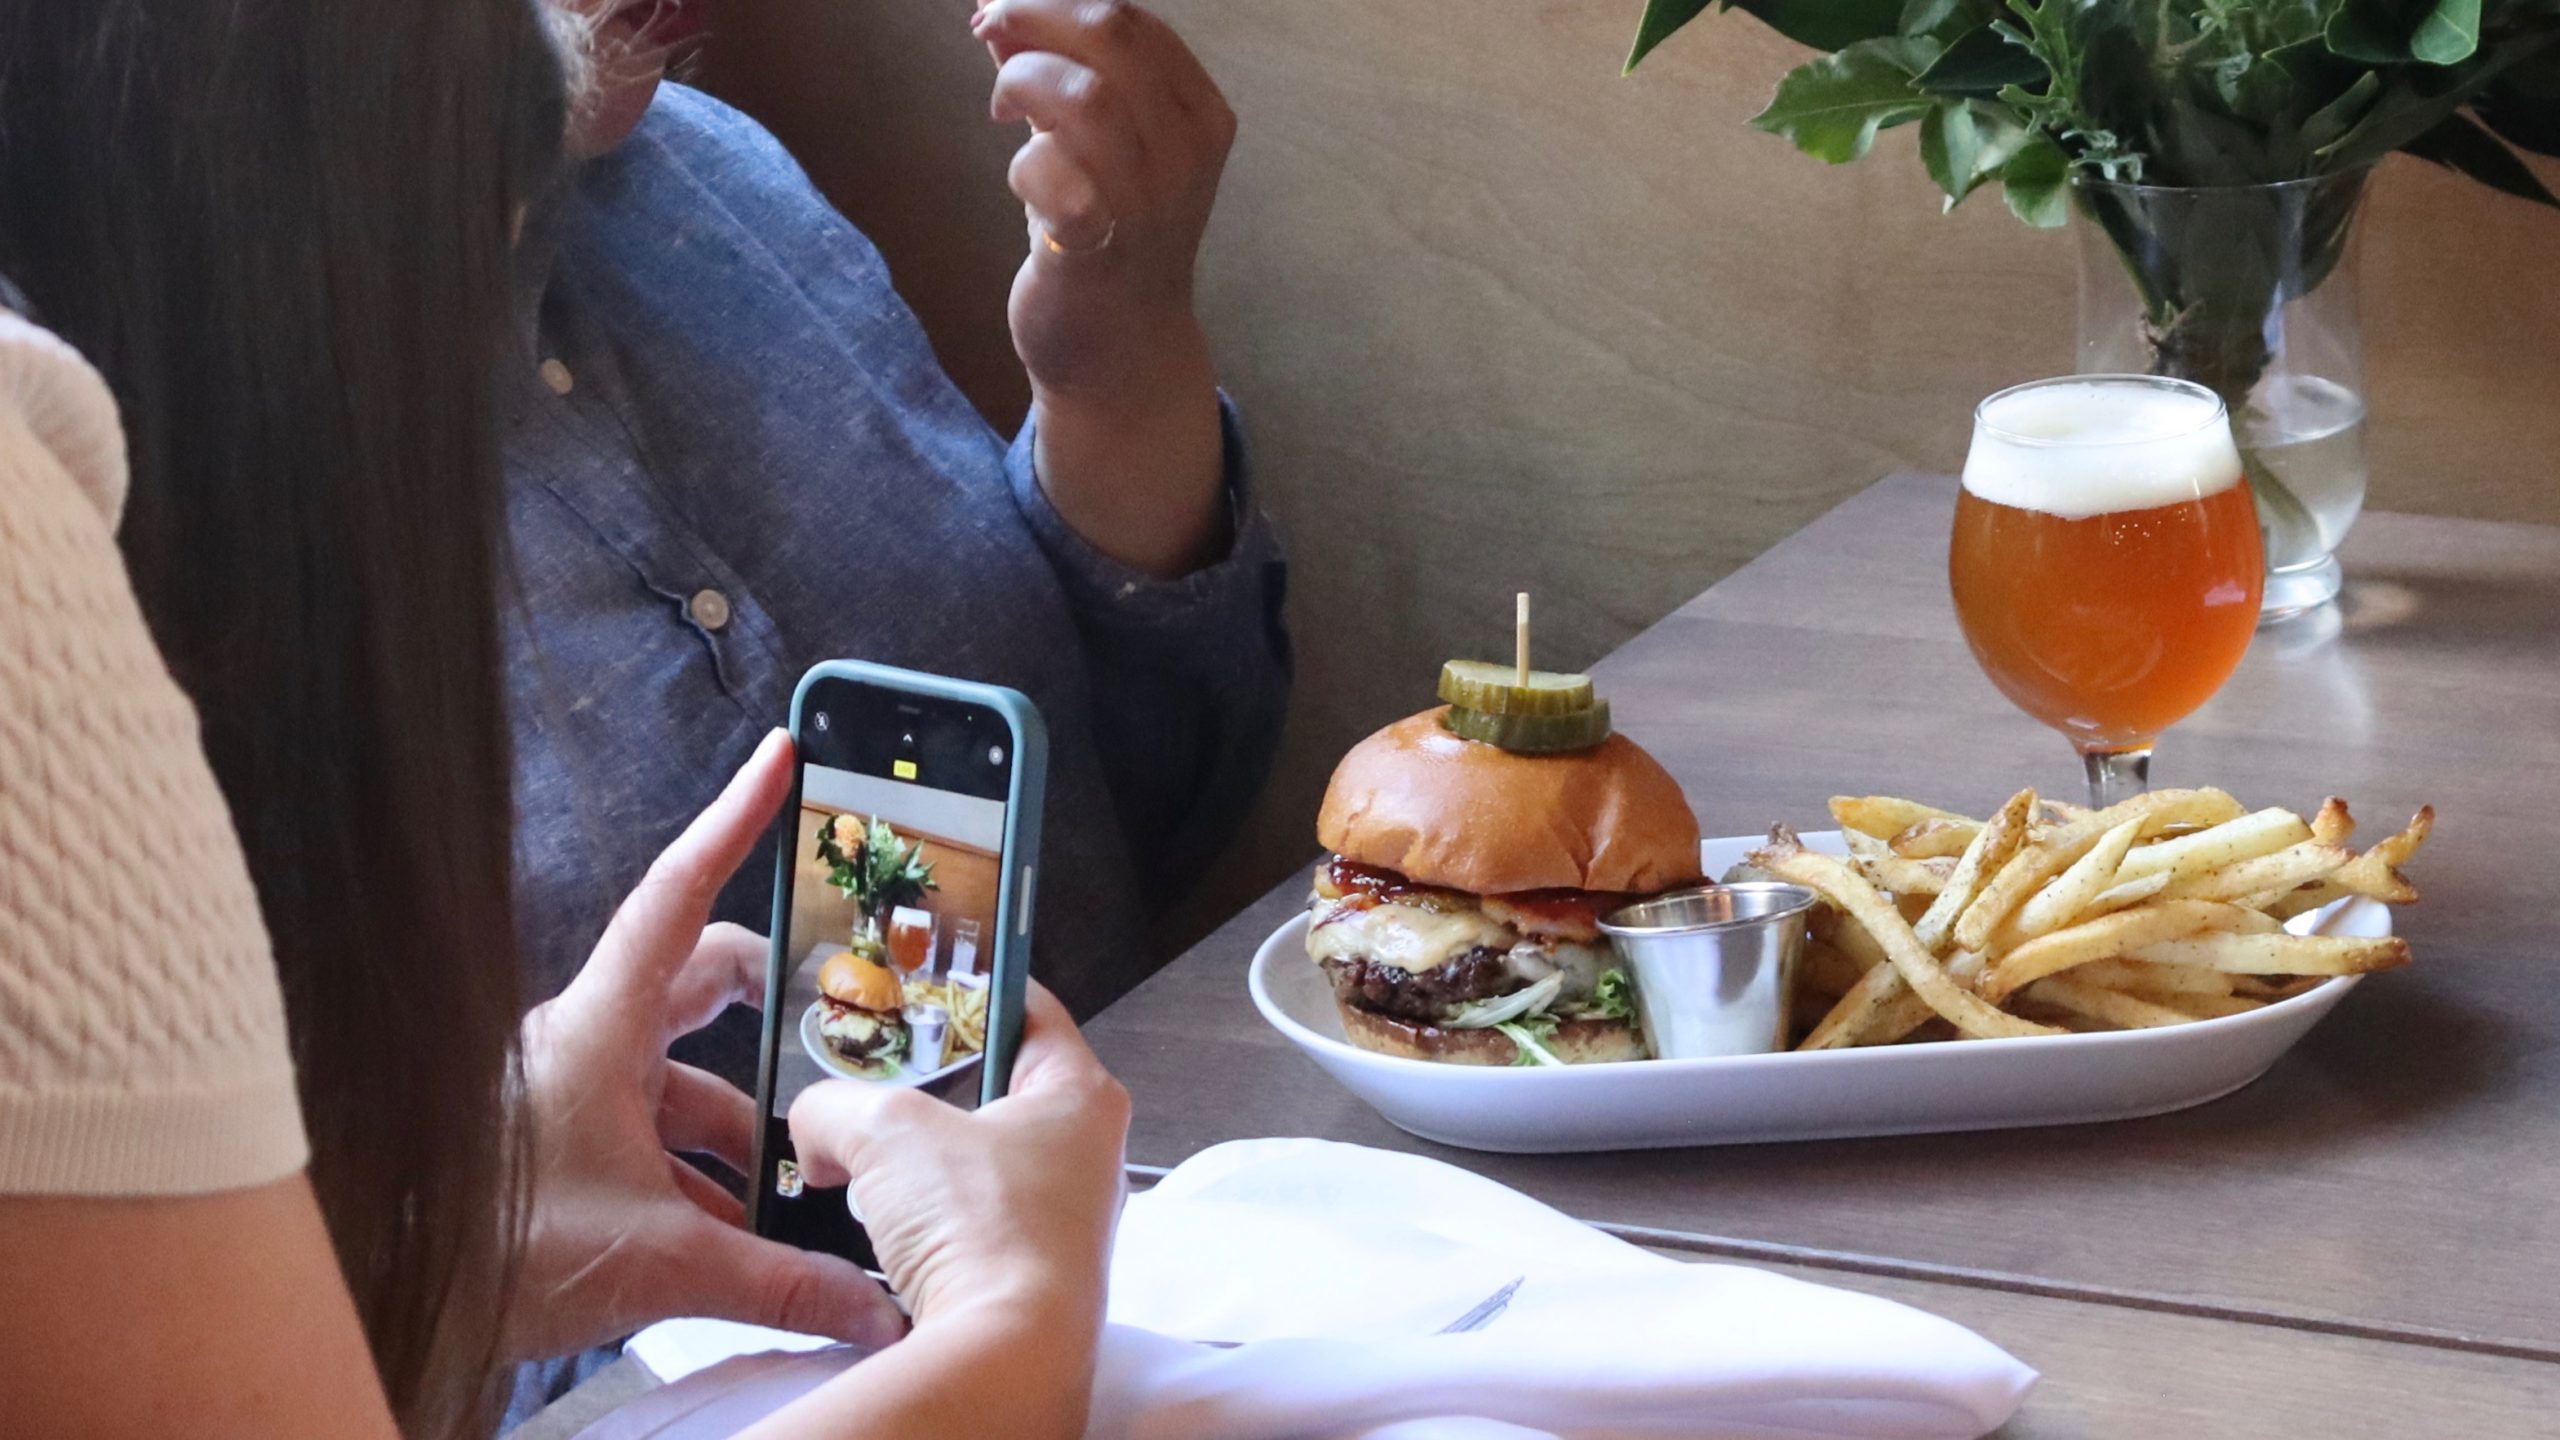 Shannon MacIntyre took photos and videos to promote Julep Restaurant’s burger for Halifax Burger Week. The restaurant hired MacIntyre to make content for Instagram. 